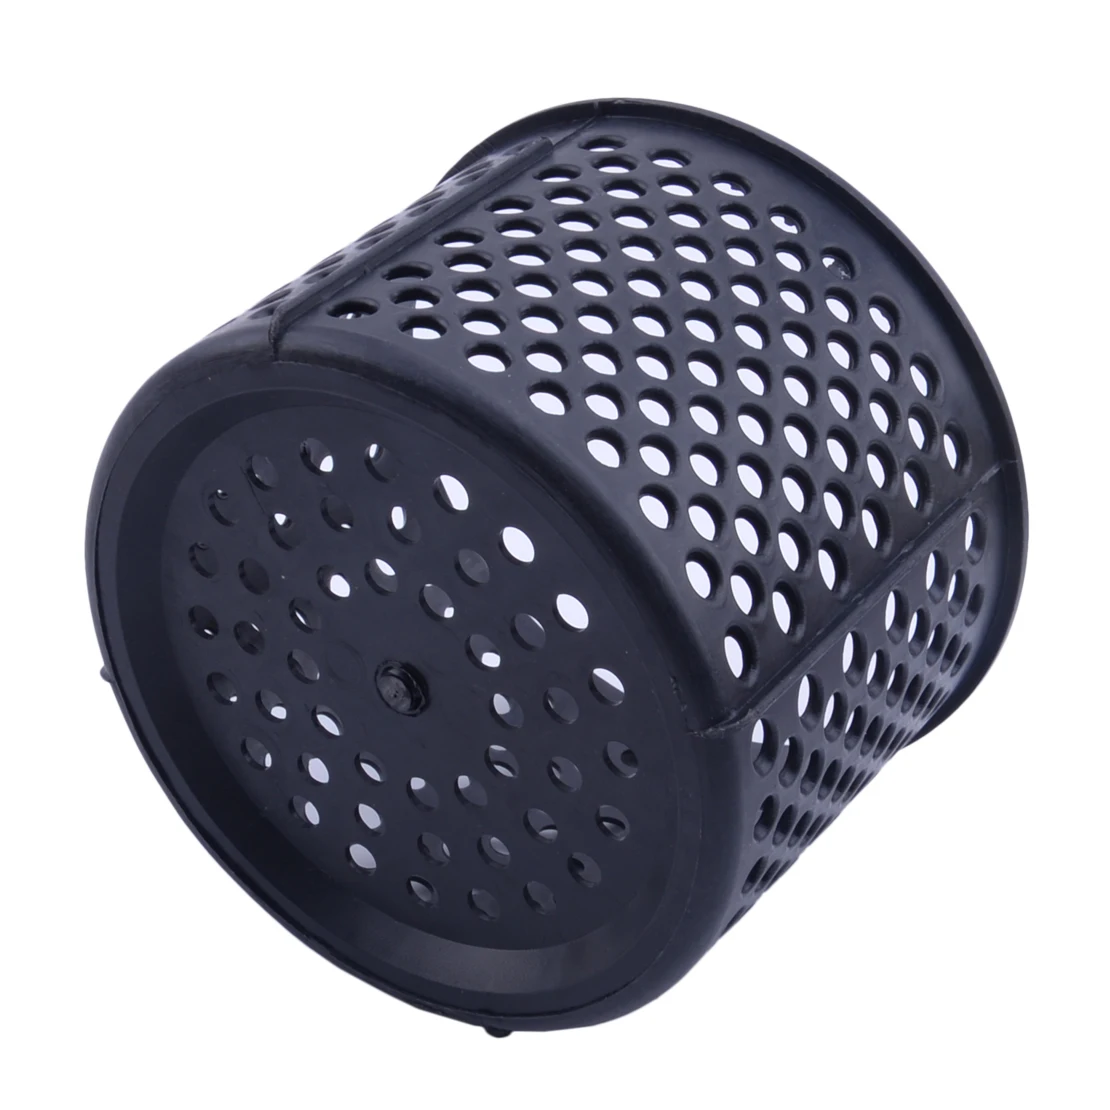 Plastic Suction Hose Strainers Filter Screen Net for 3" Water Pump Suction Hose 